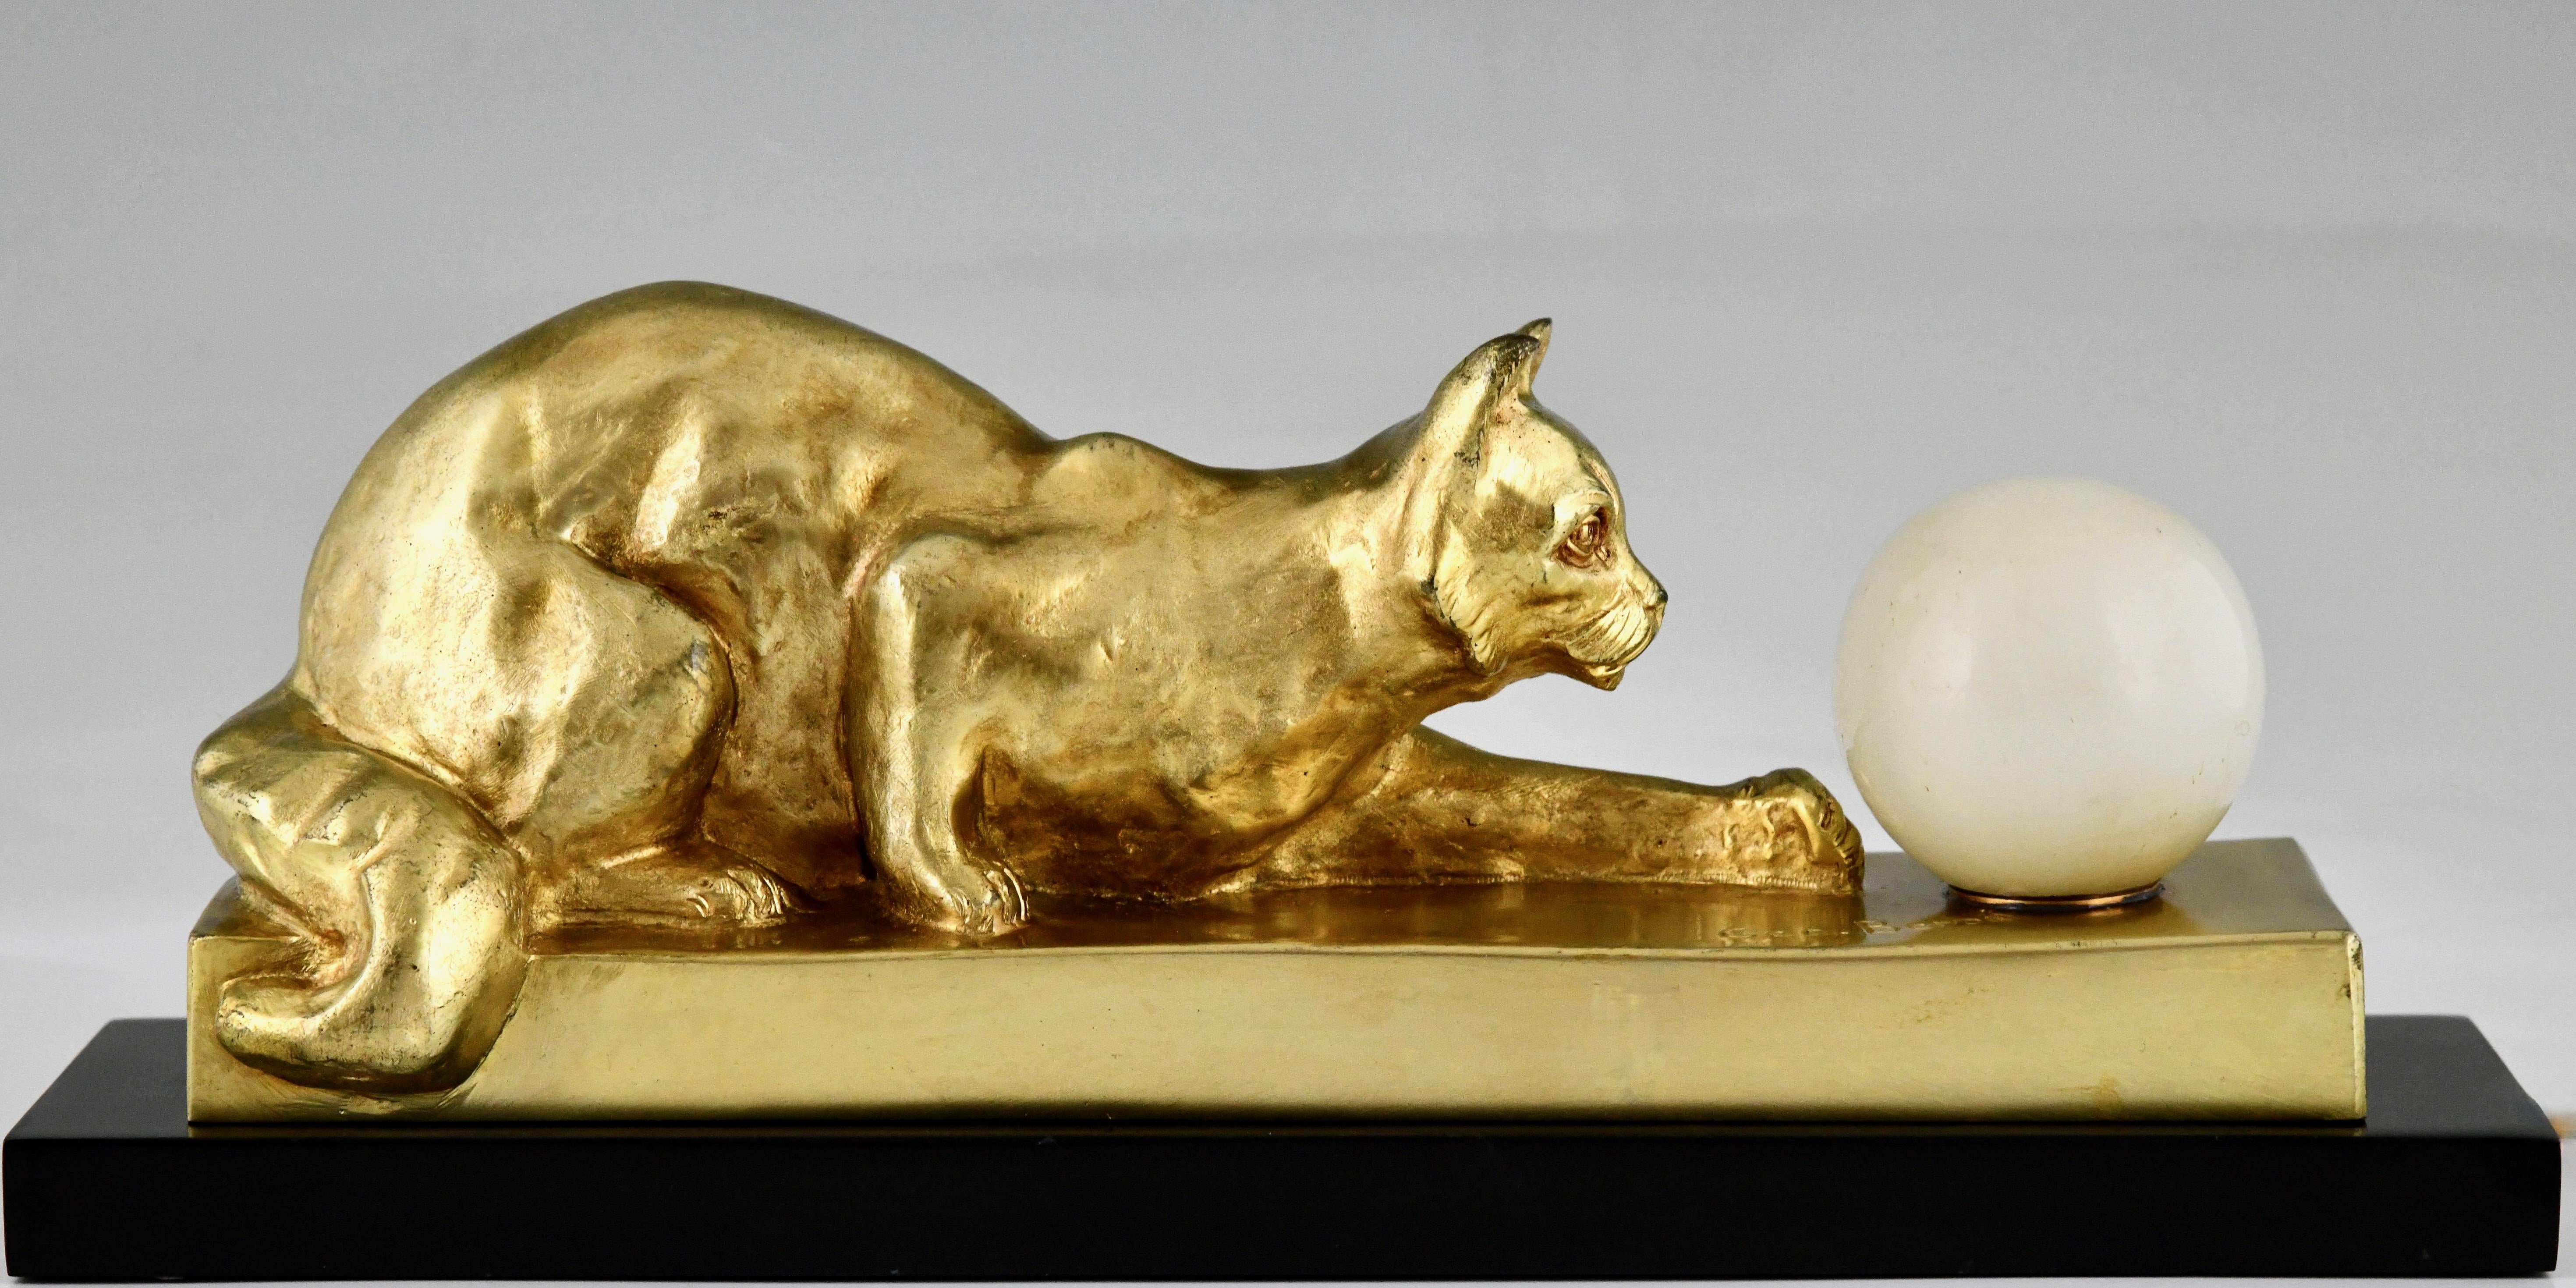 Art Deco bronze lamp sculpture cat with ball by Georges Benoit. 
Foundry Renaud éditeurs Paris. 
Gilt bronze on a Belgian Black marble base. 
Illuminated onyx ball. 
France 1930. 
Literature:	
The dictionary of sculptors in bronze, James Mackay.